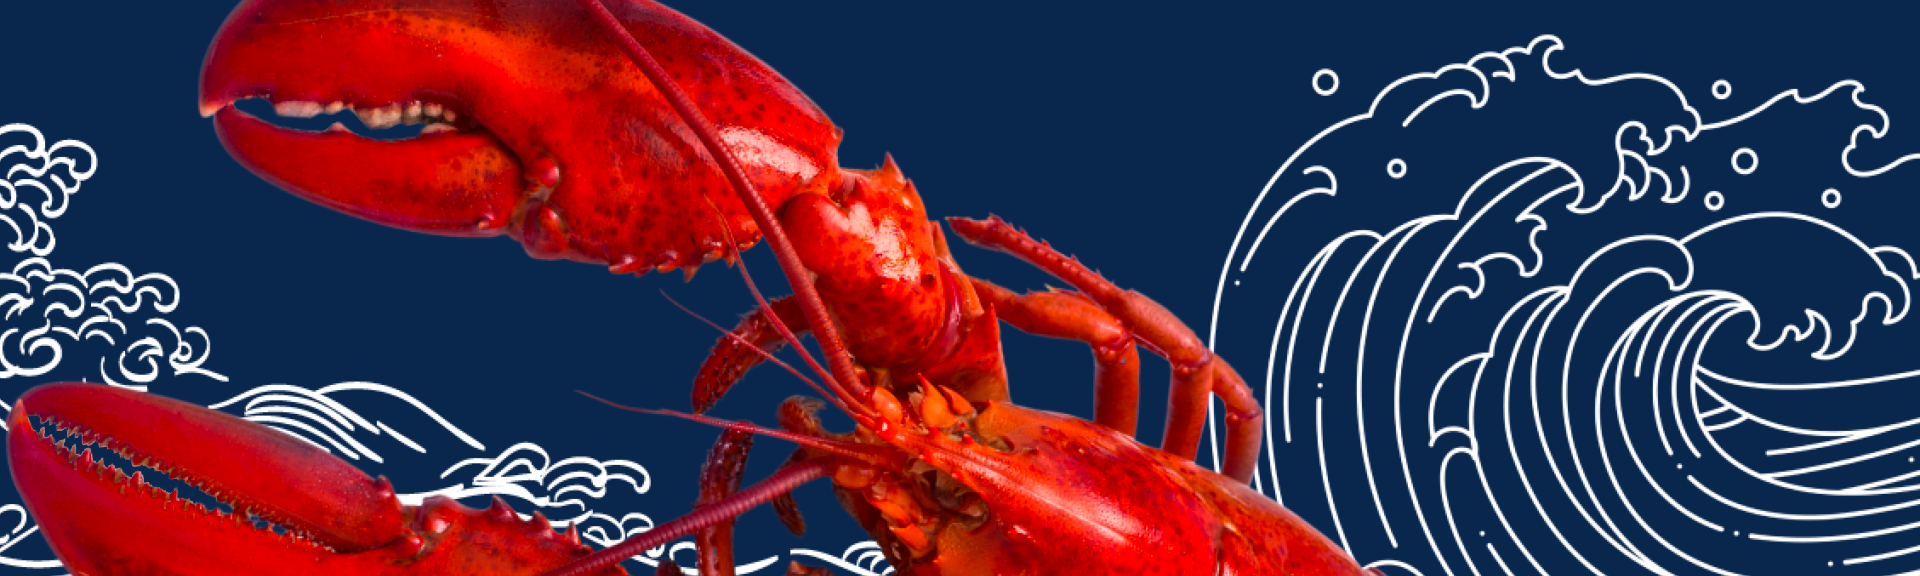 Maine Lobster Fact Sheet recipe image